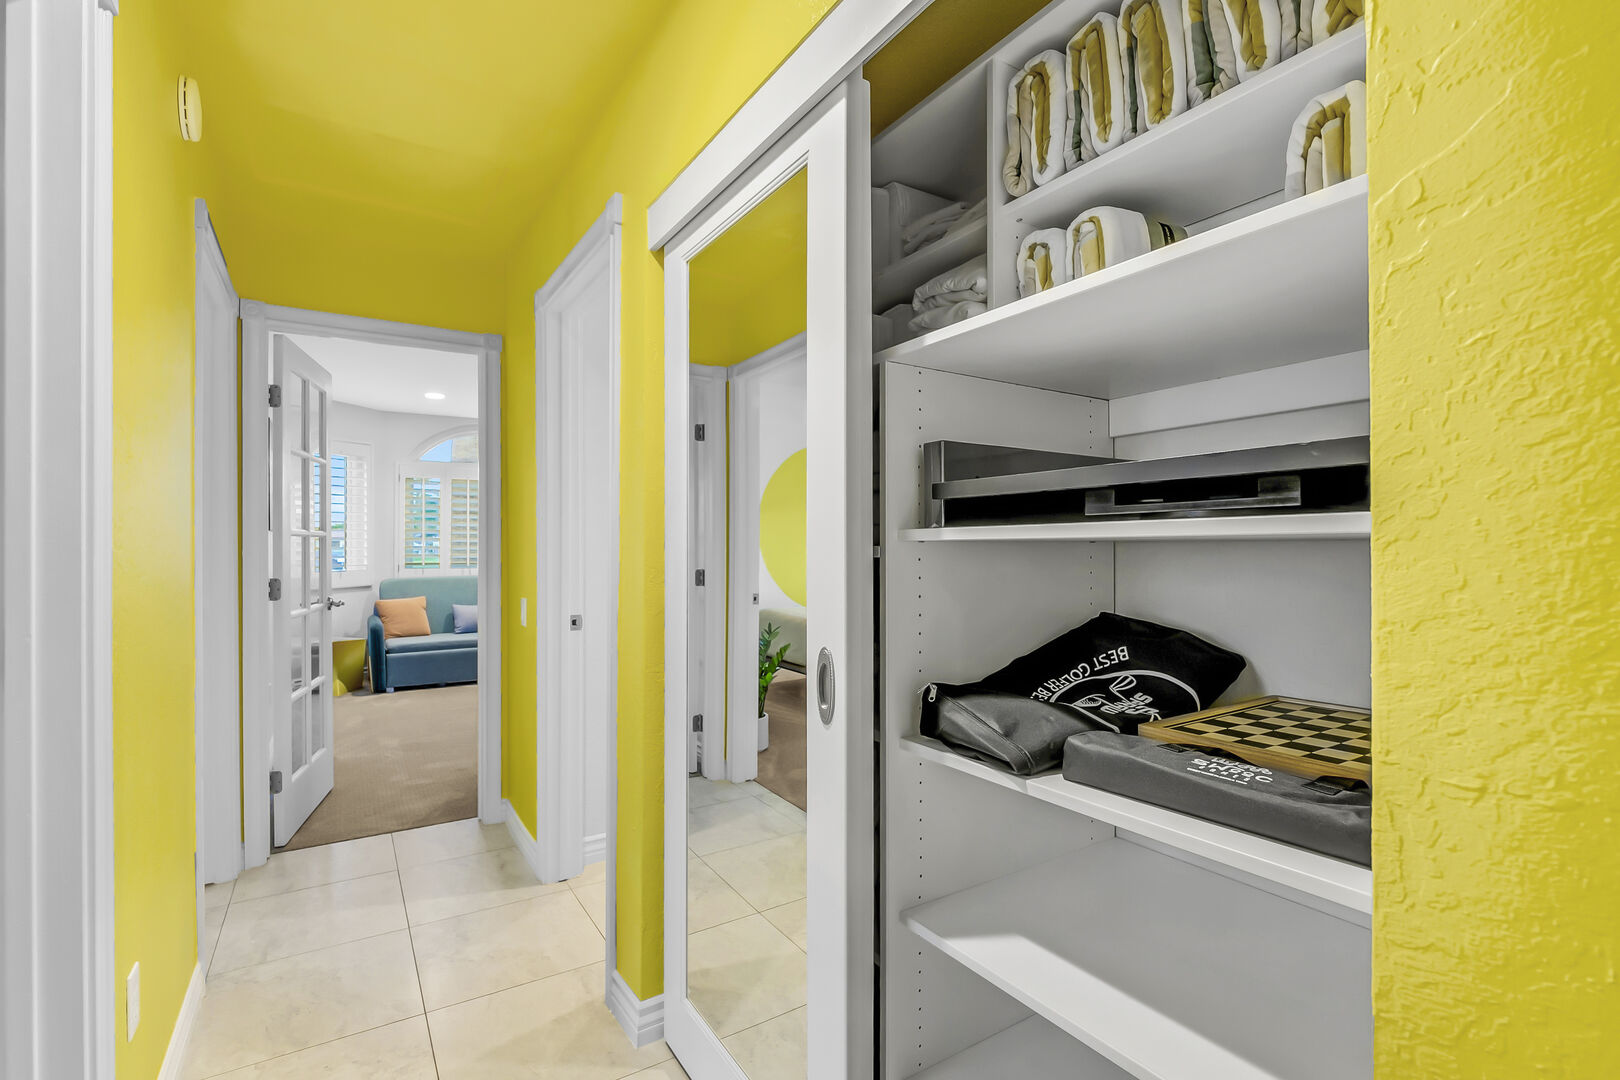 Additional pool towels are located in the hallway sliding closet doors.